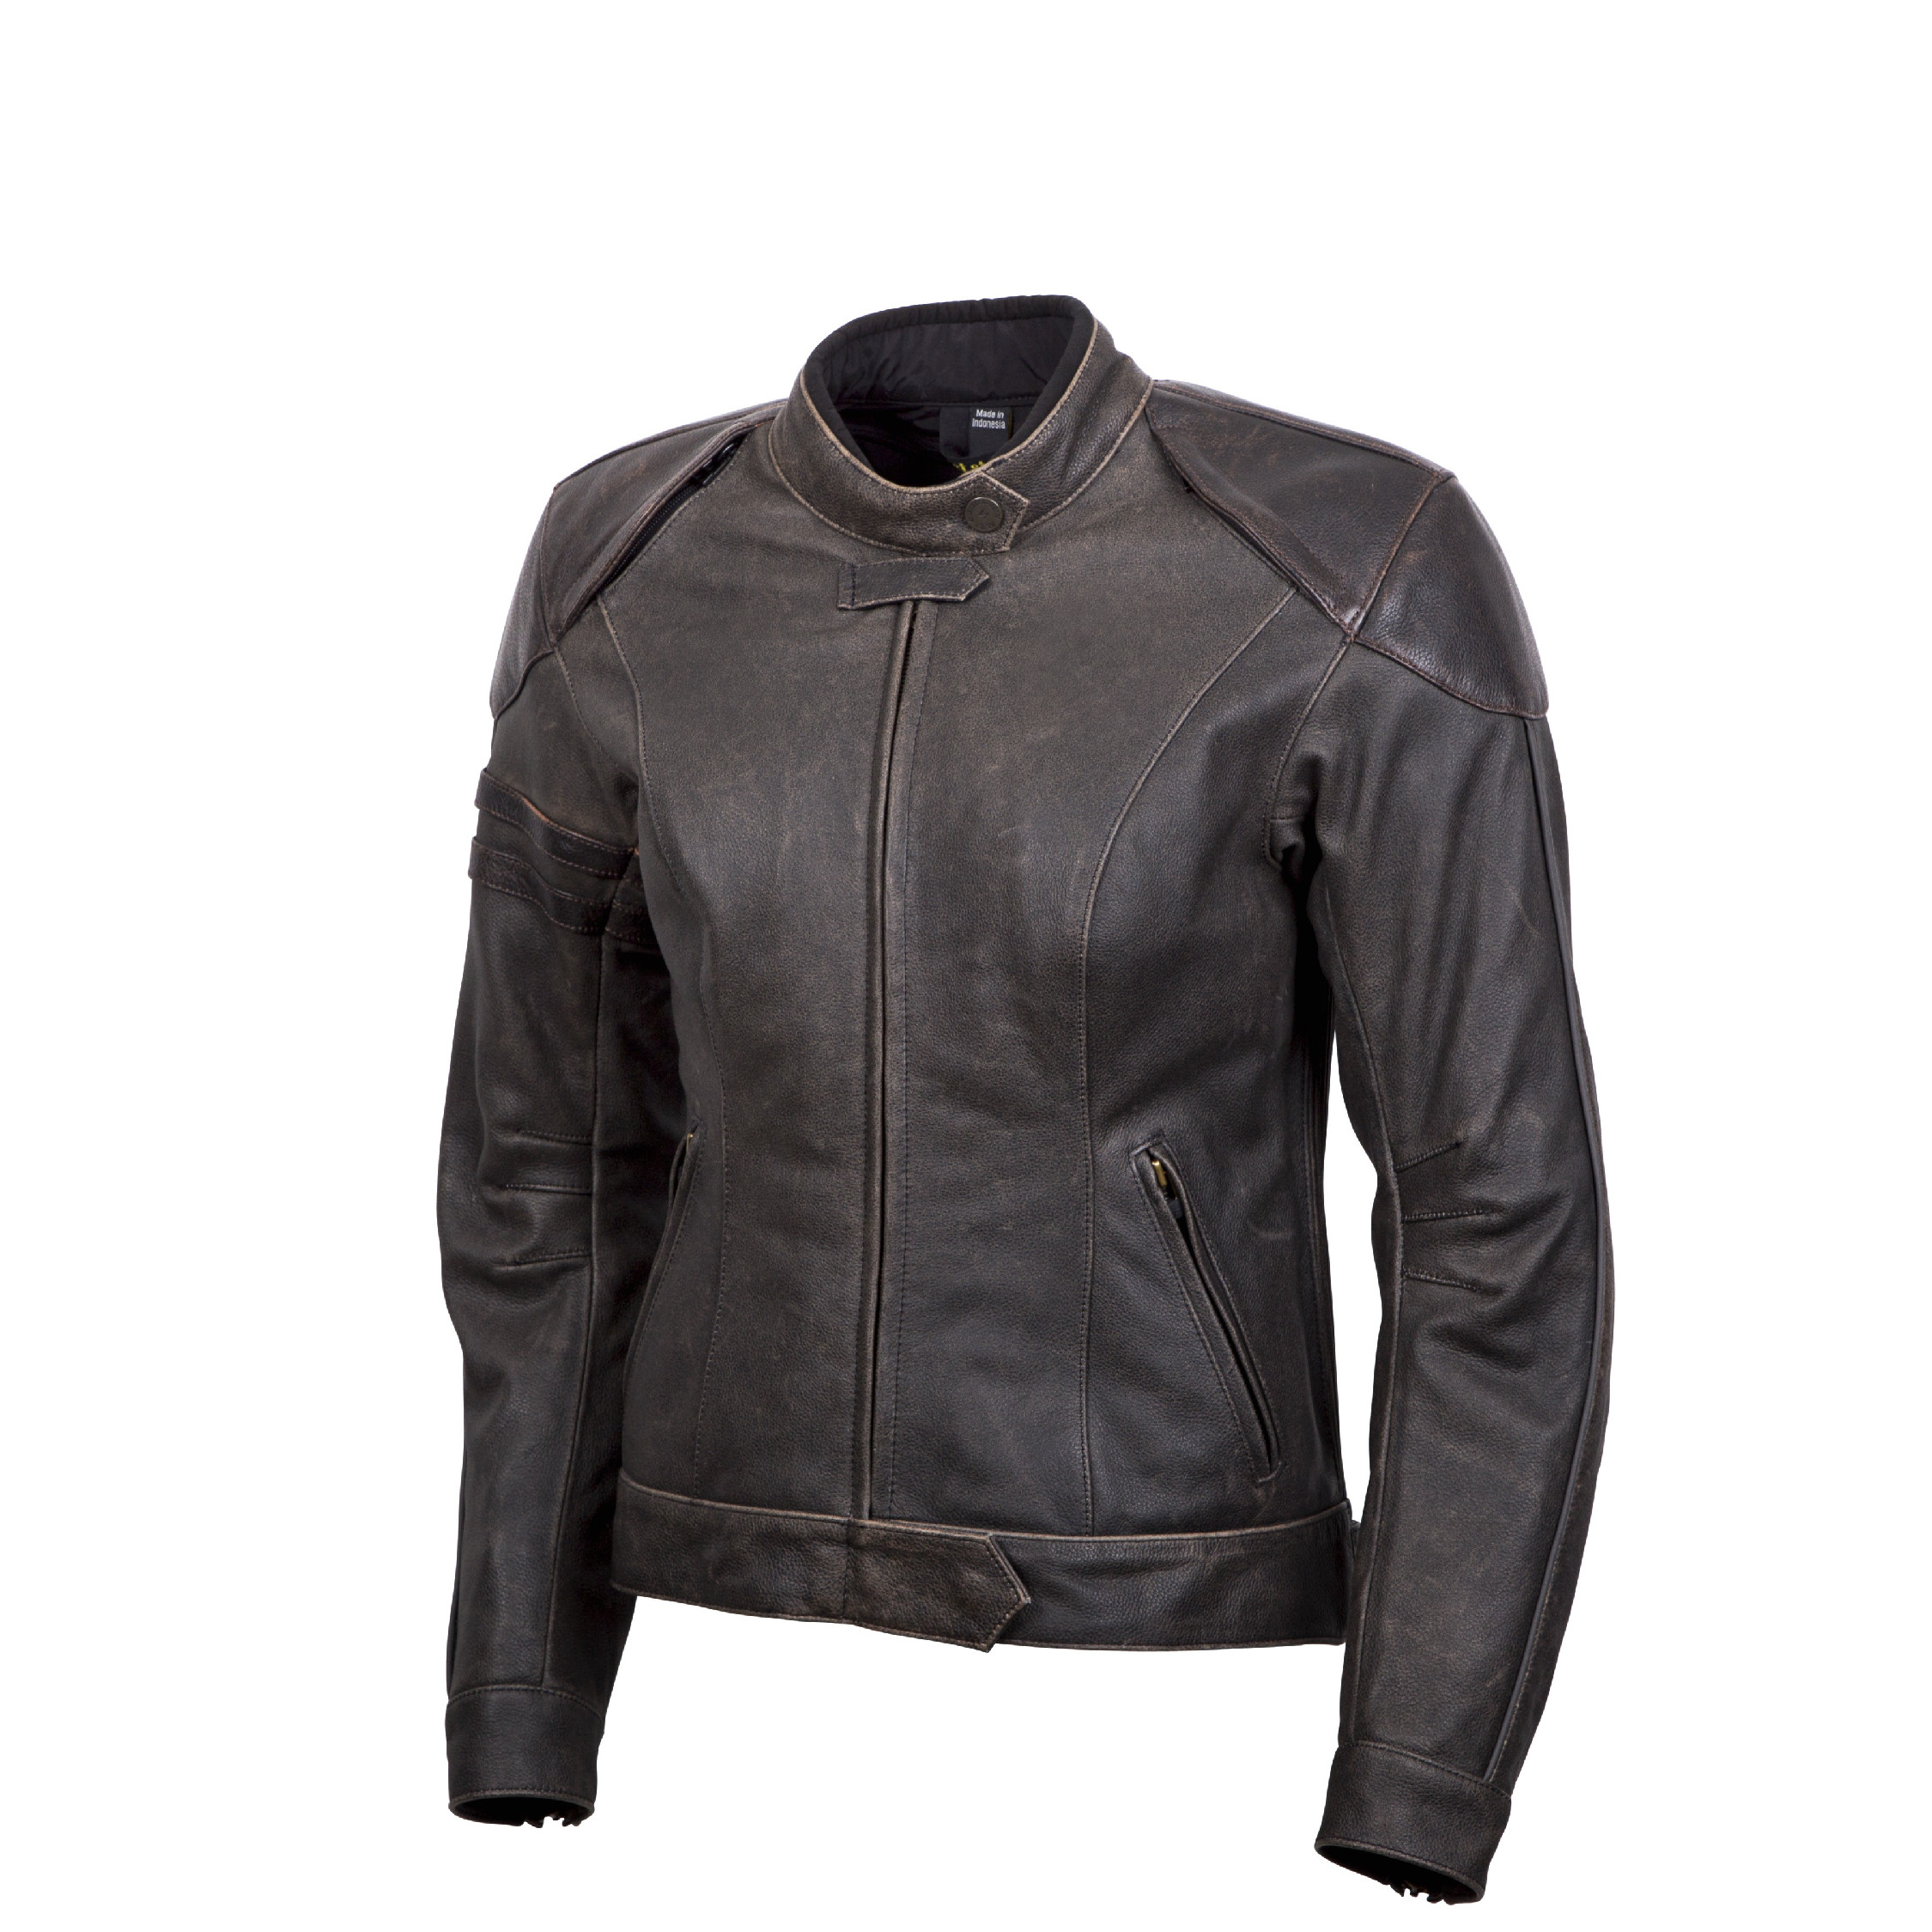 Scorpion Womens Brown Catalina Leather Motorcycle Jacket | eBay